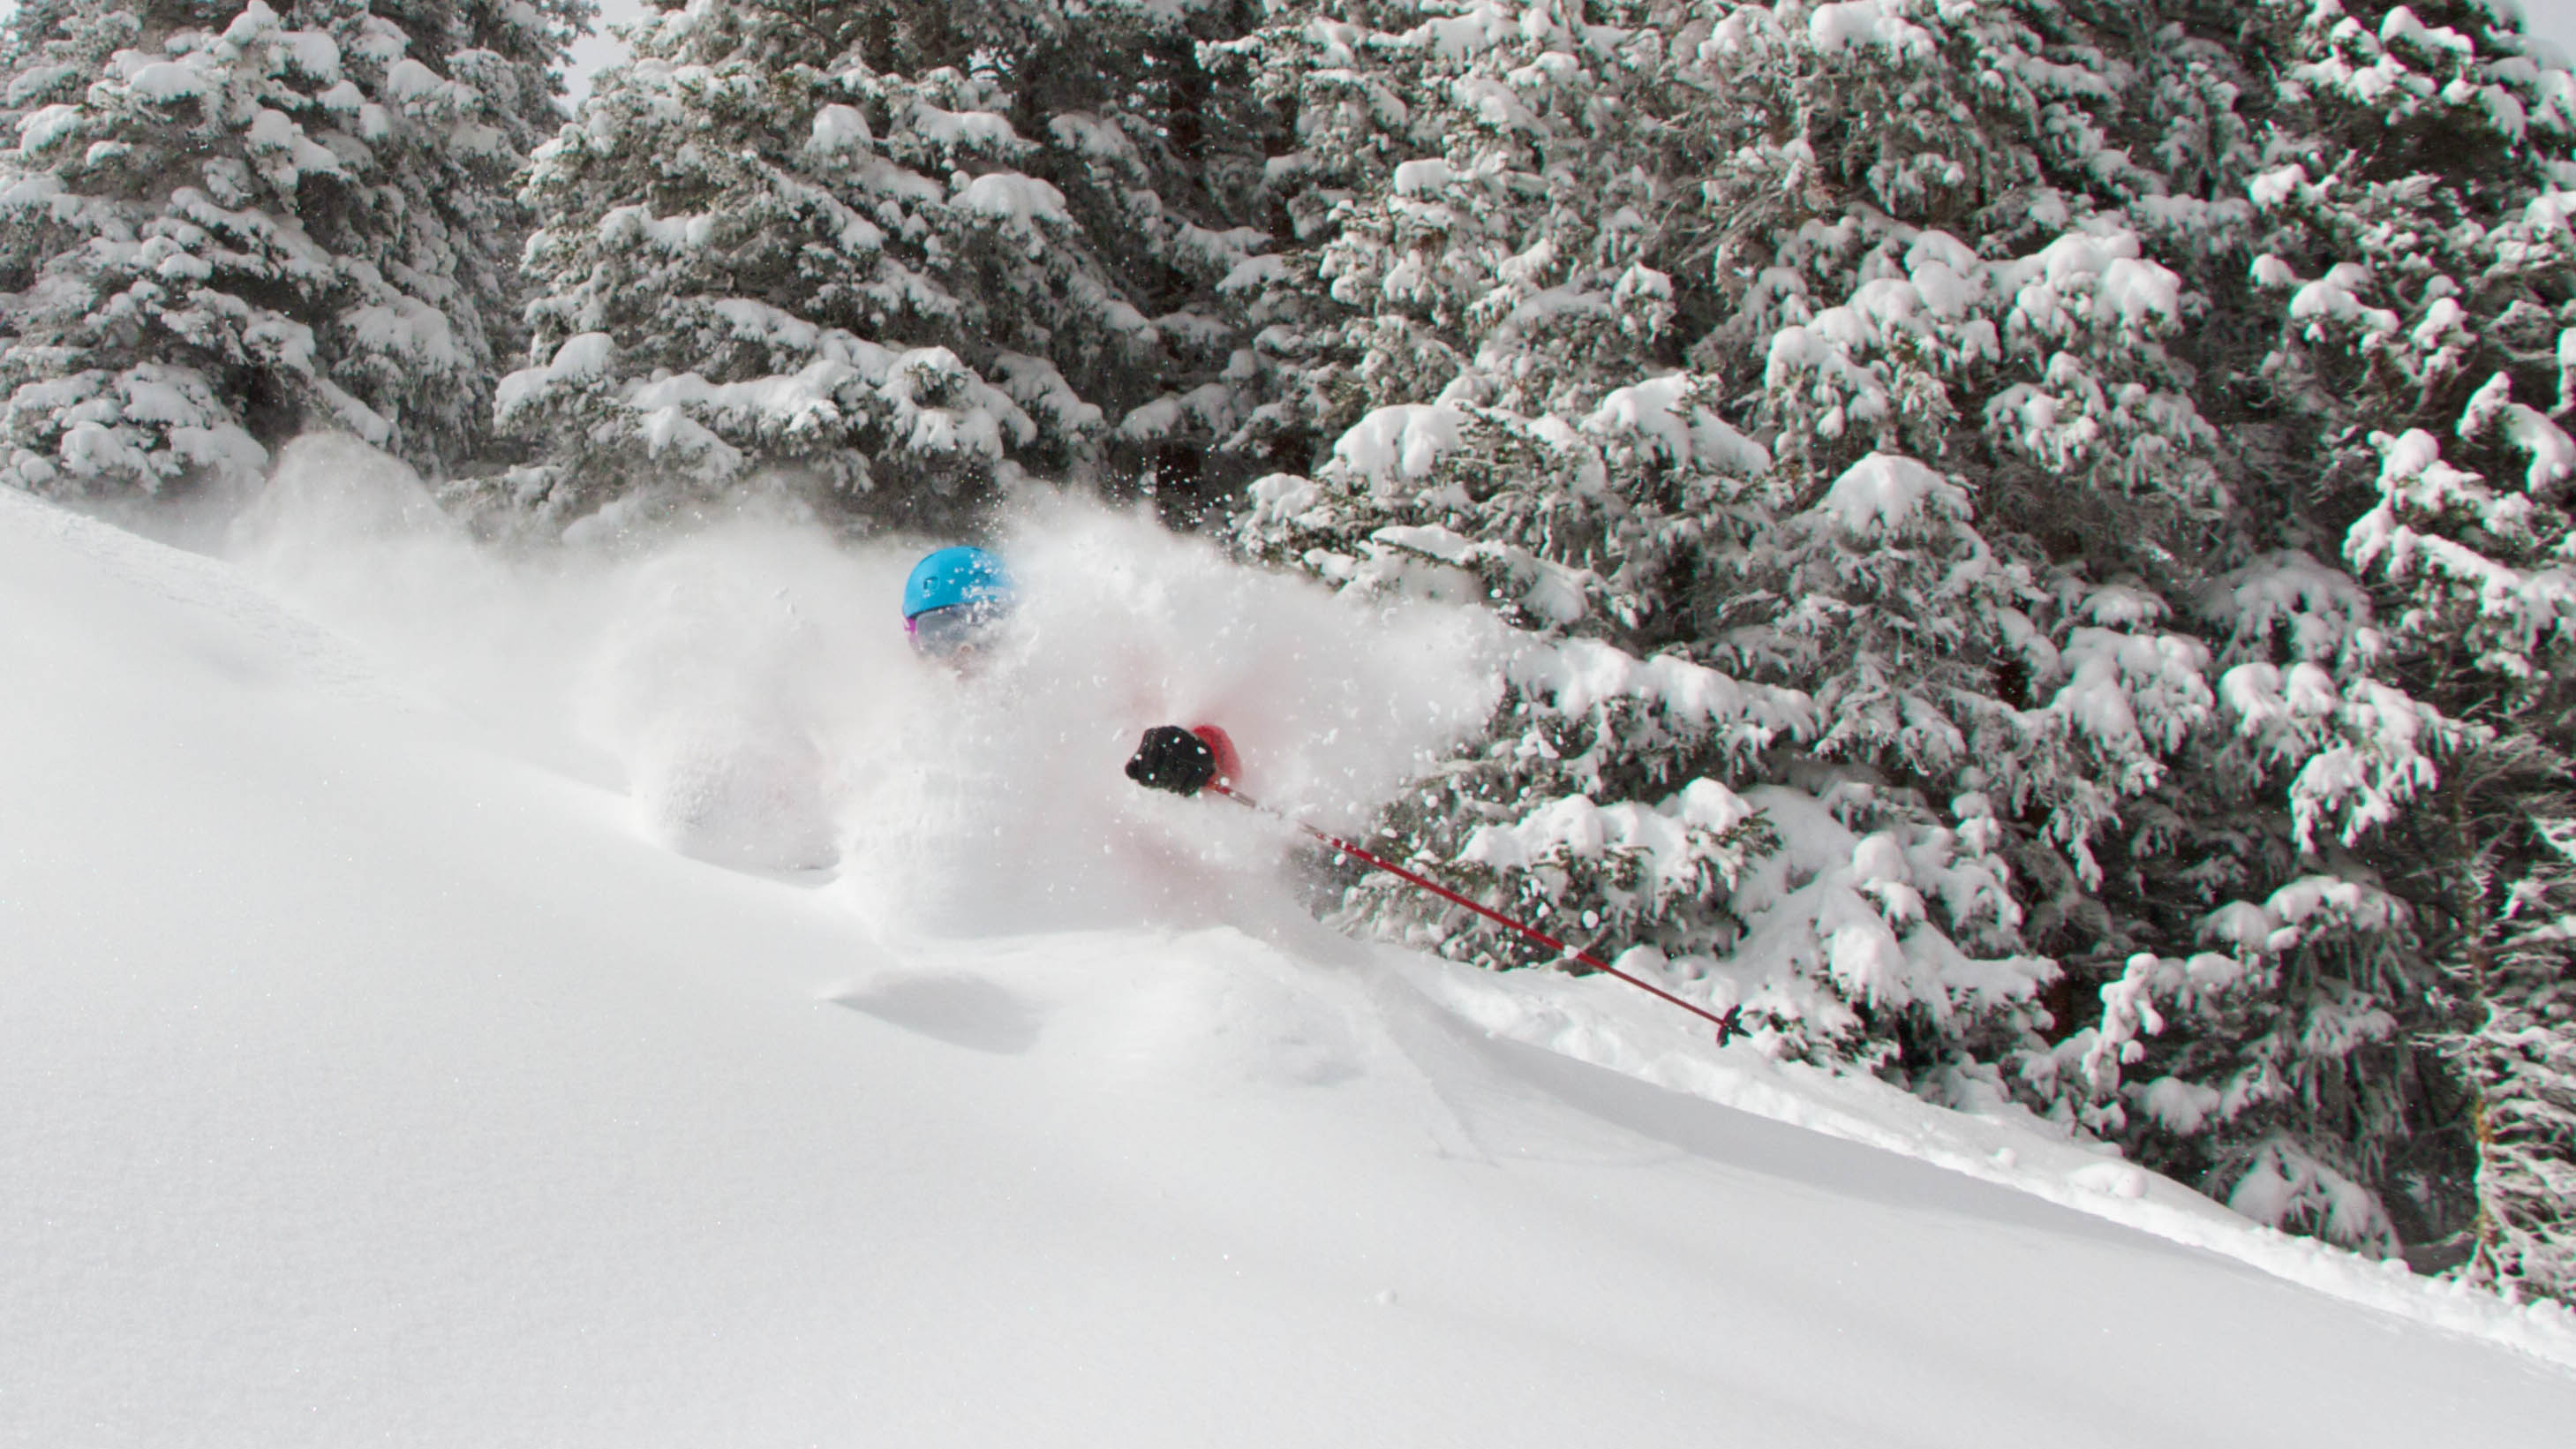 Hopefully there's a bit of this happening in Colorado this week. Silverton?